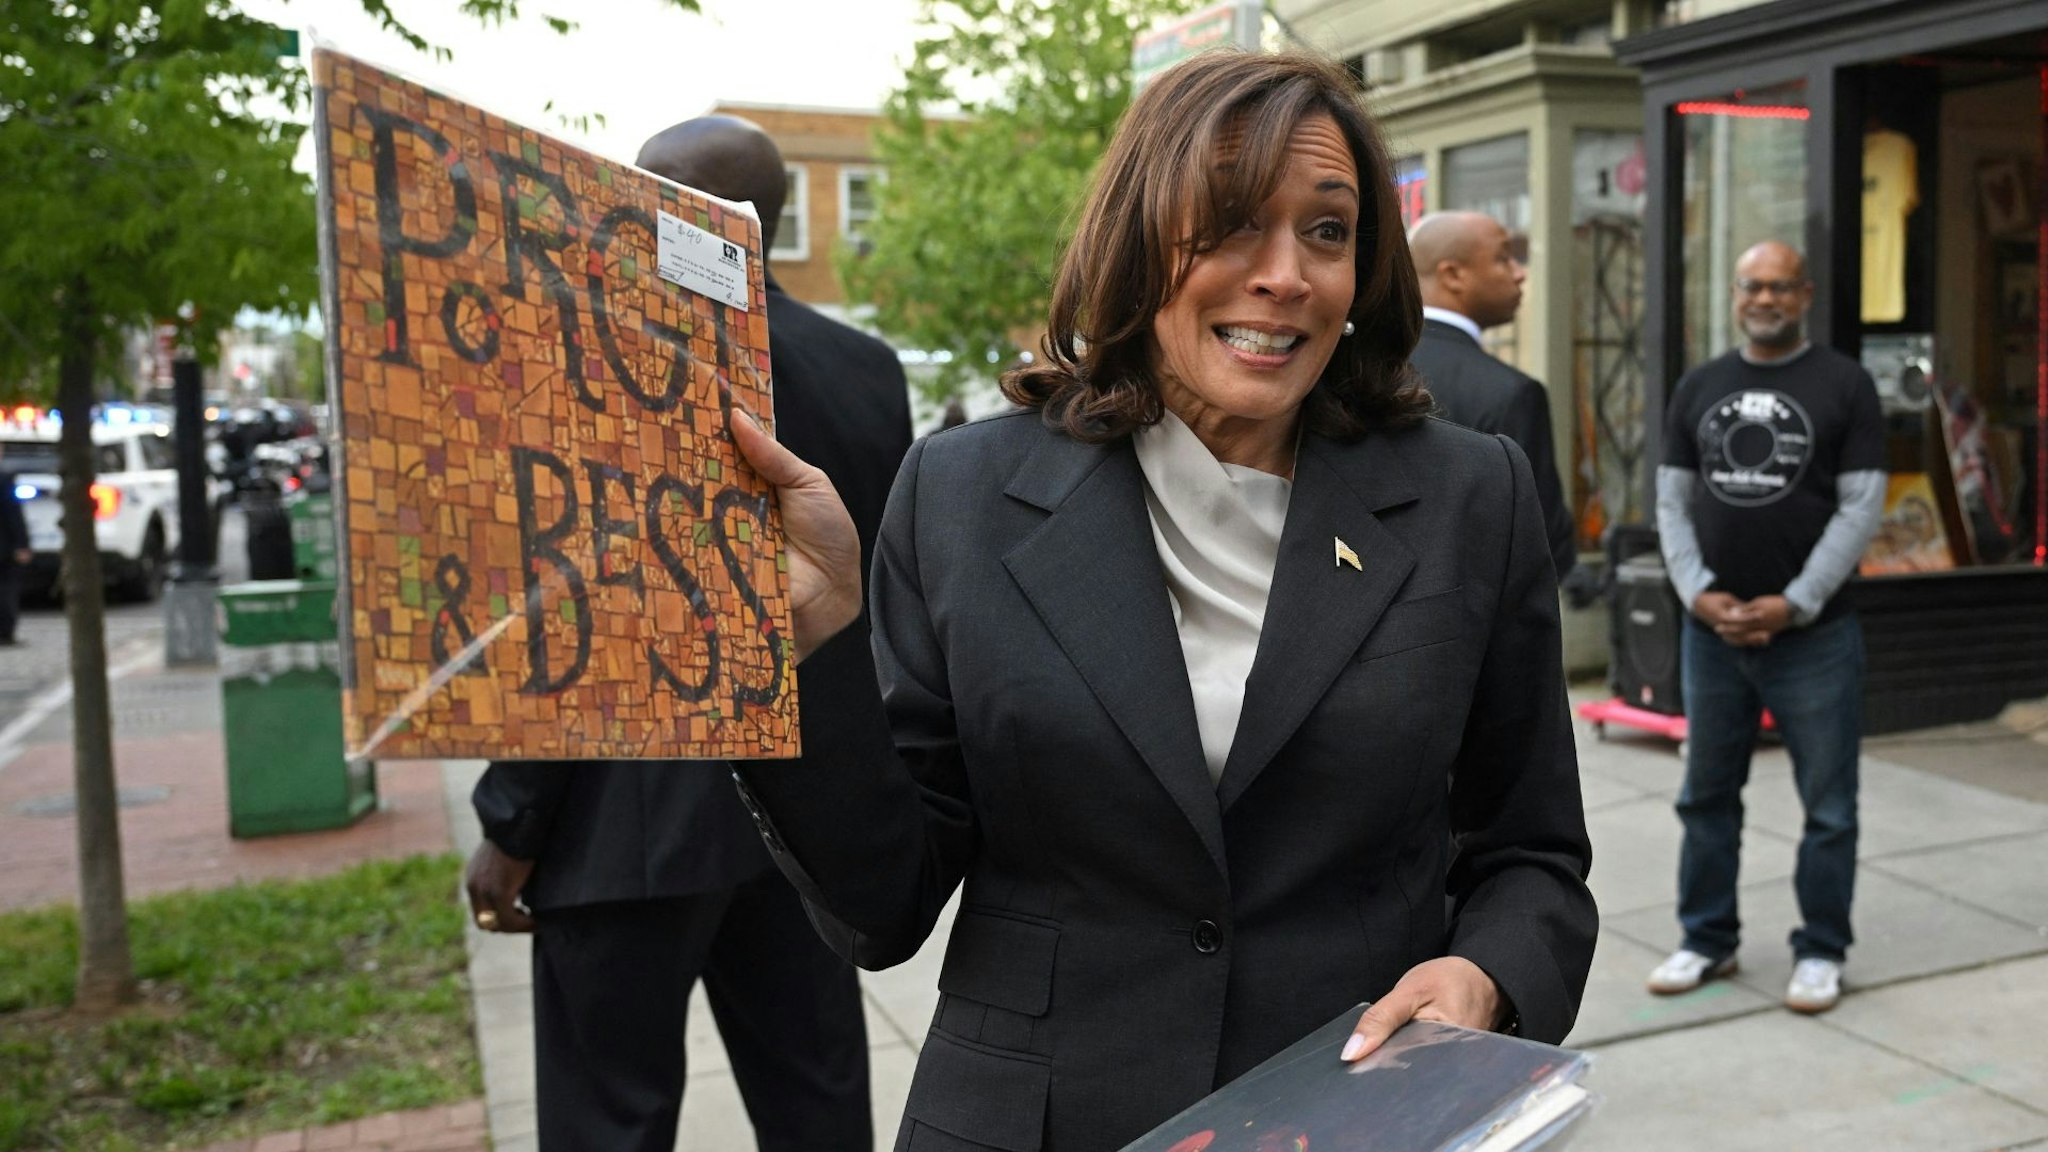 US Vice President Kamala Harris shows records she bought at Home Rule Records in Washington, DC, on May 3, 2023.